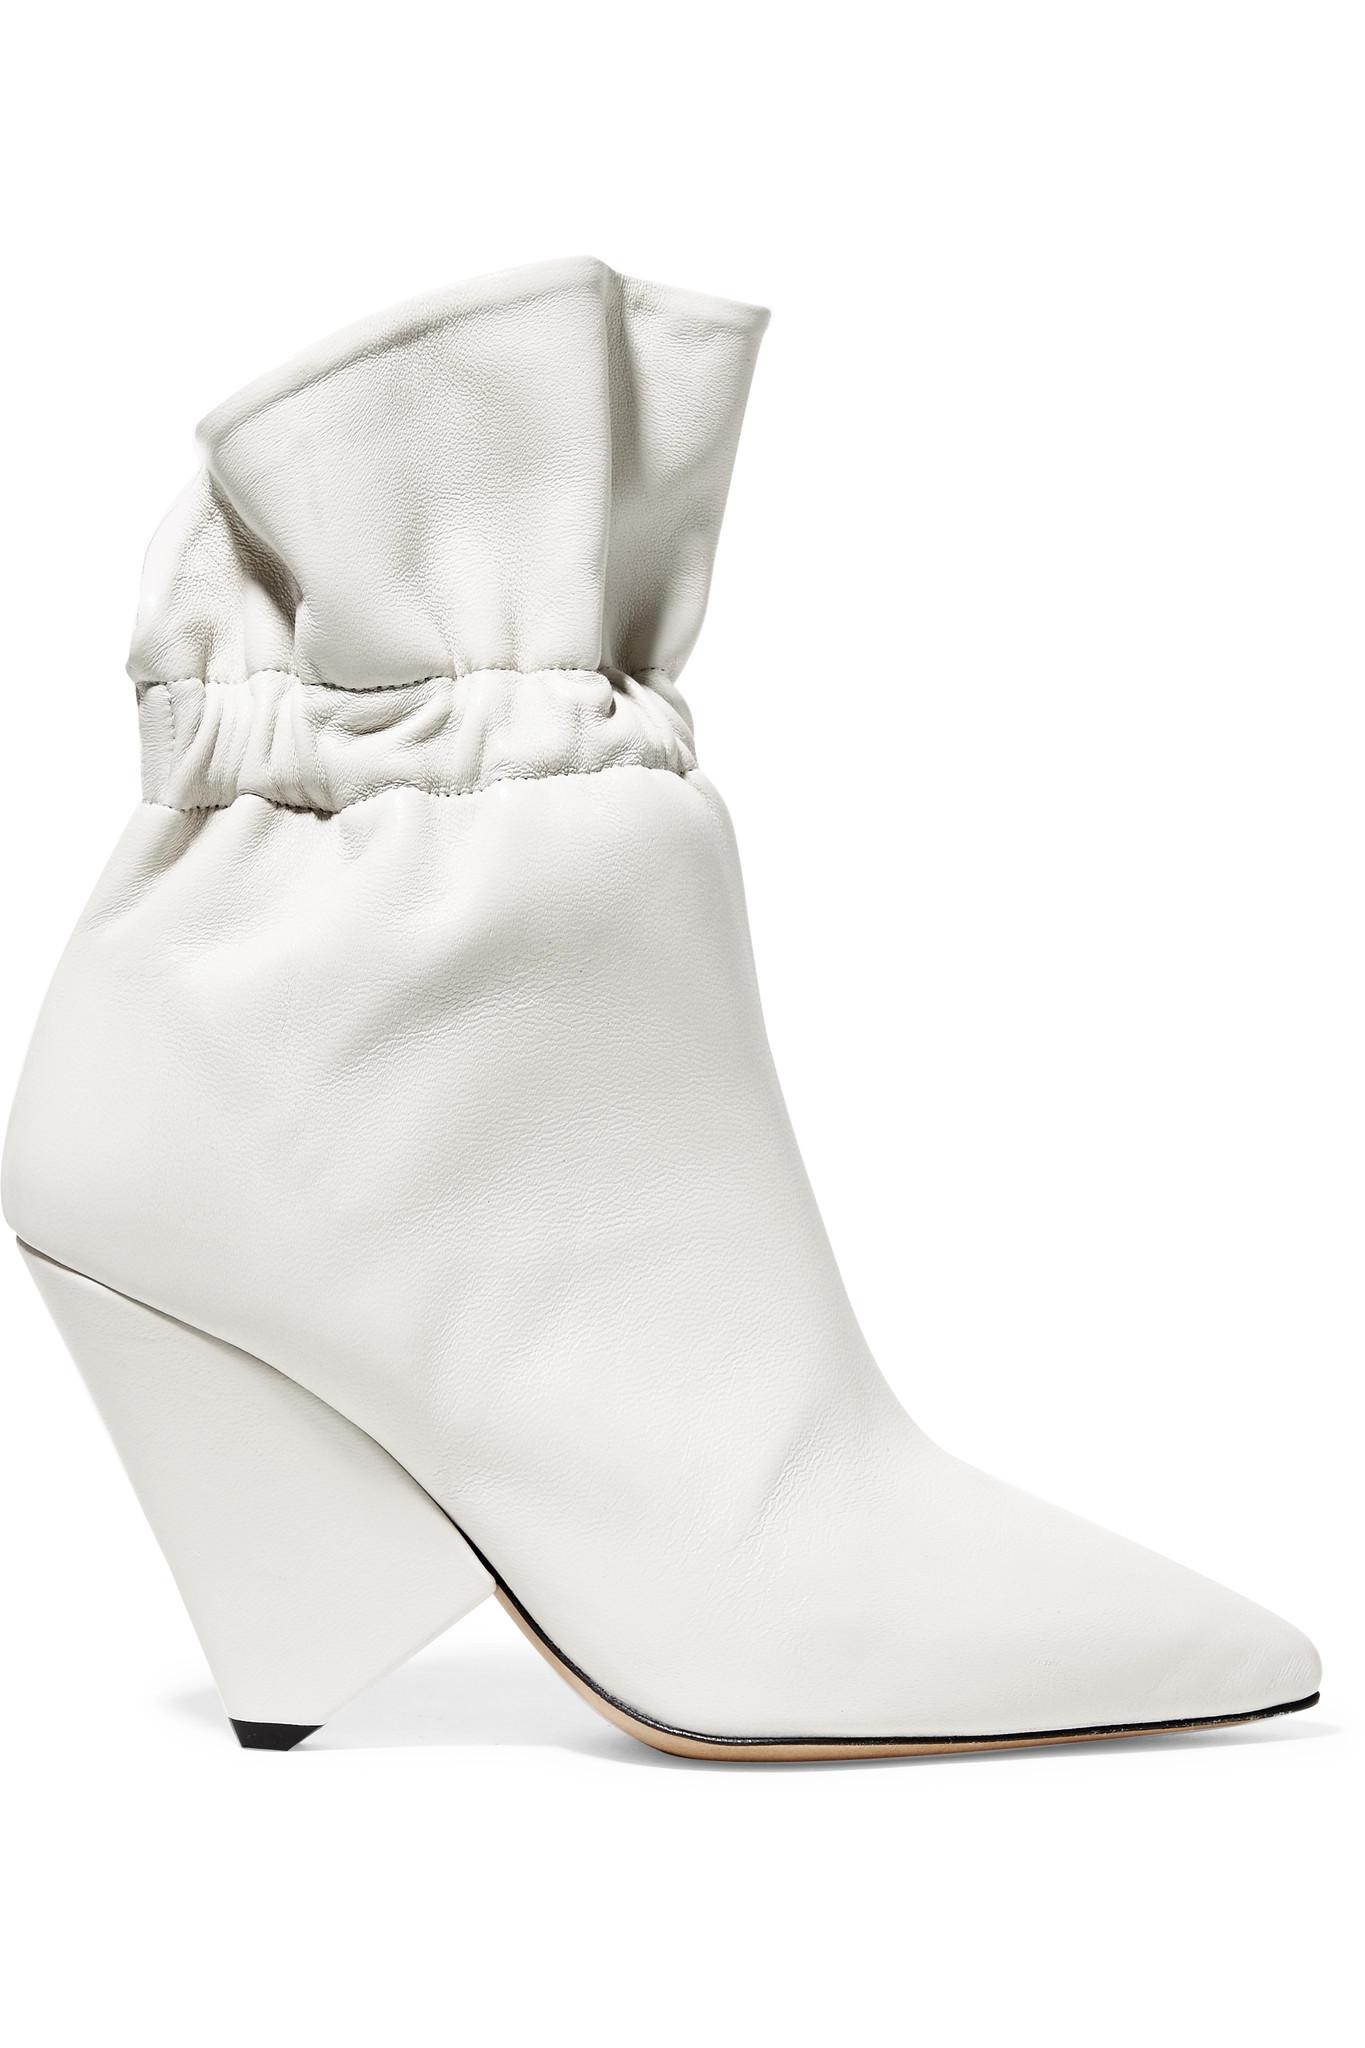 Isabel Marant Lileas Ruched Leather Ankle Boots in Ivory (White) | Lyst